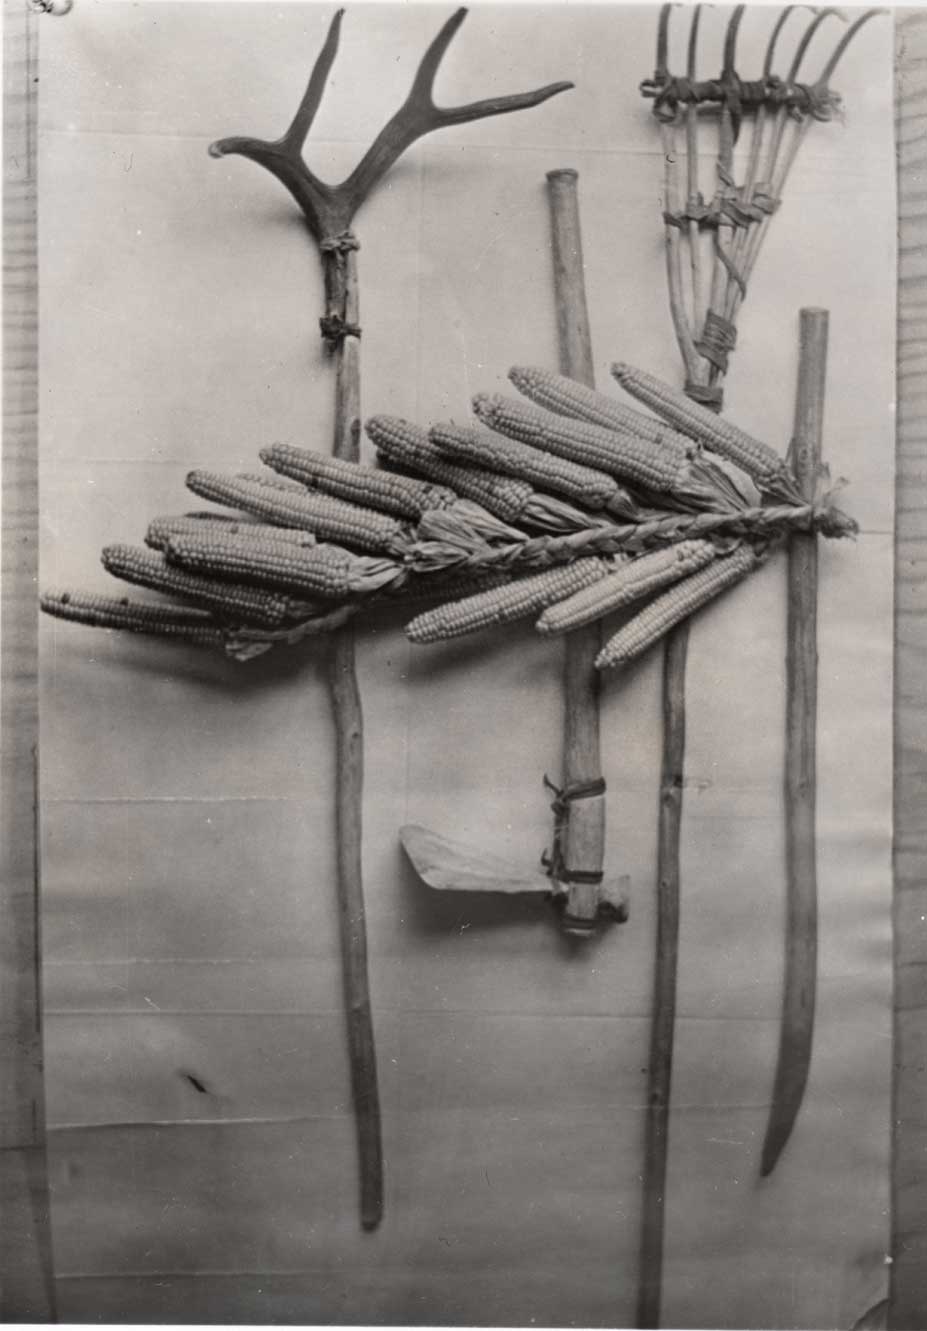 Figure 3. These early garden tools